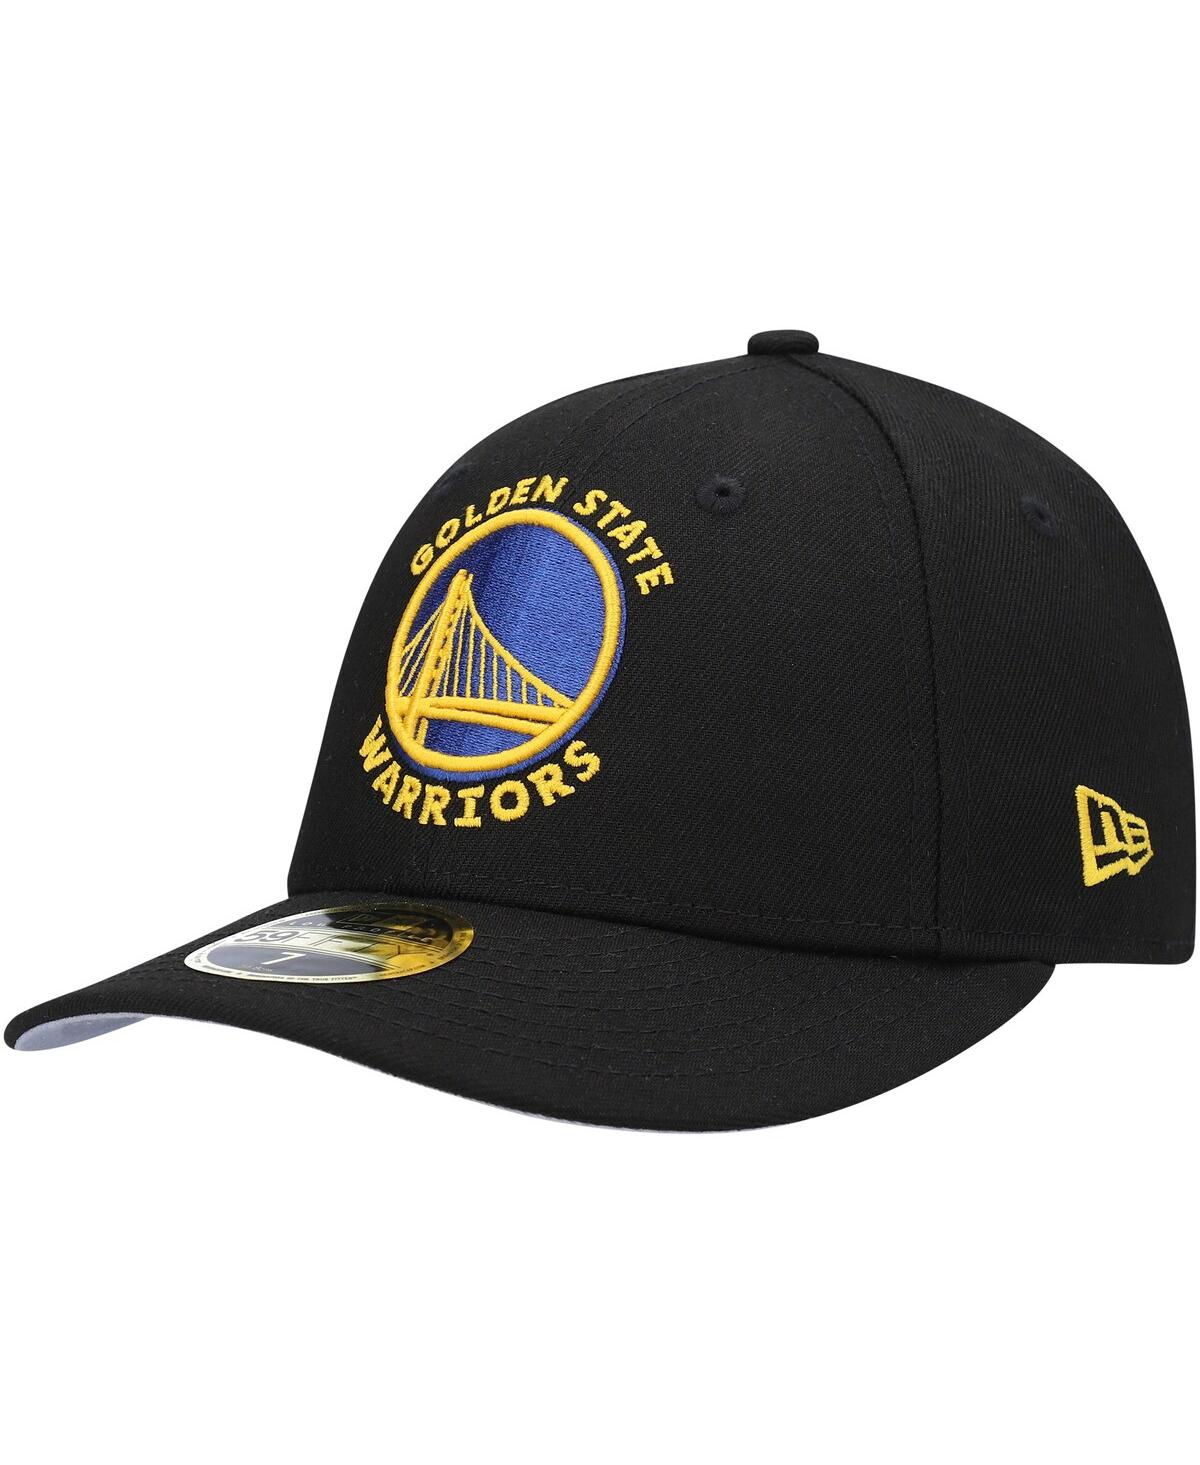 Men's Black Golden State Warriors Team Low Profile 59FIFTY Fitted Hat - Black